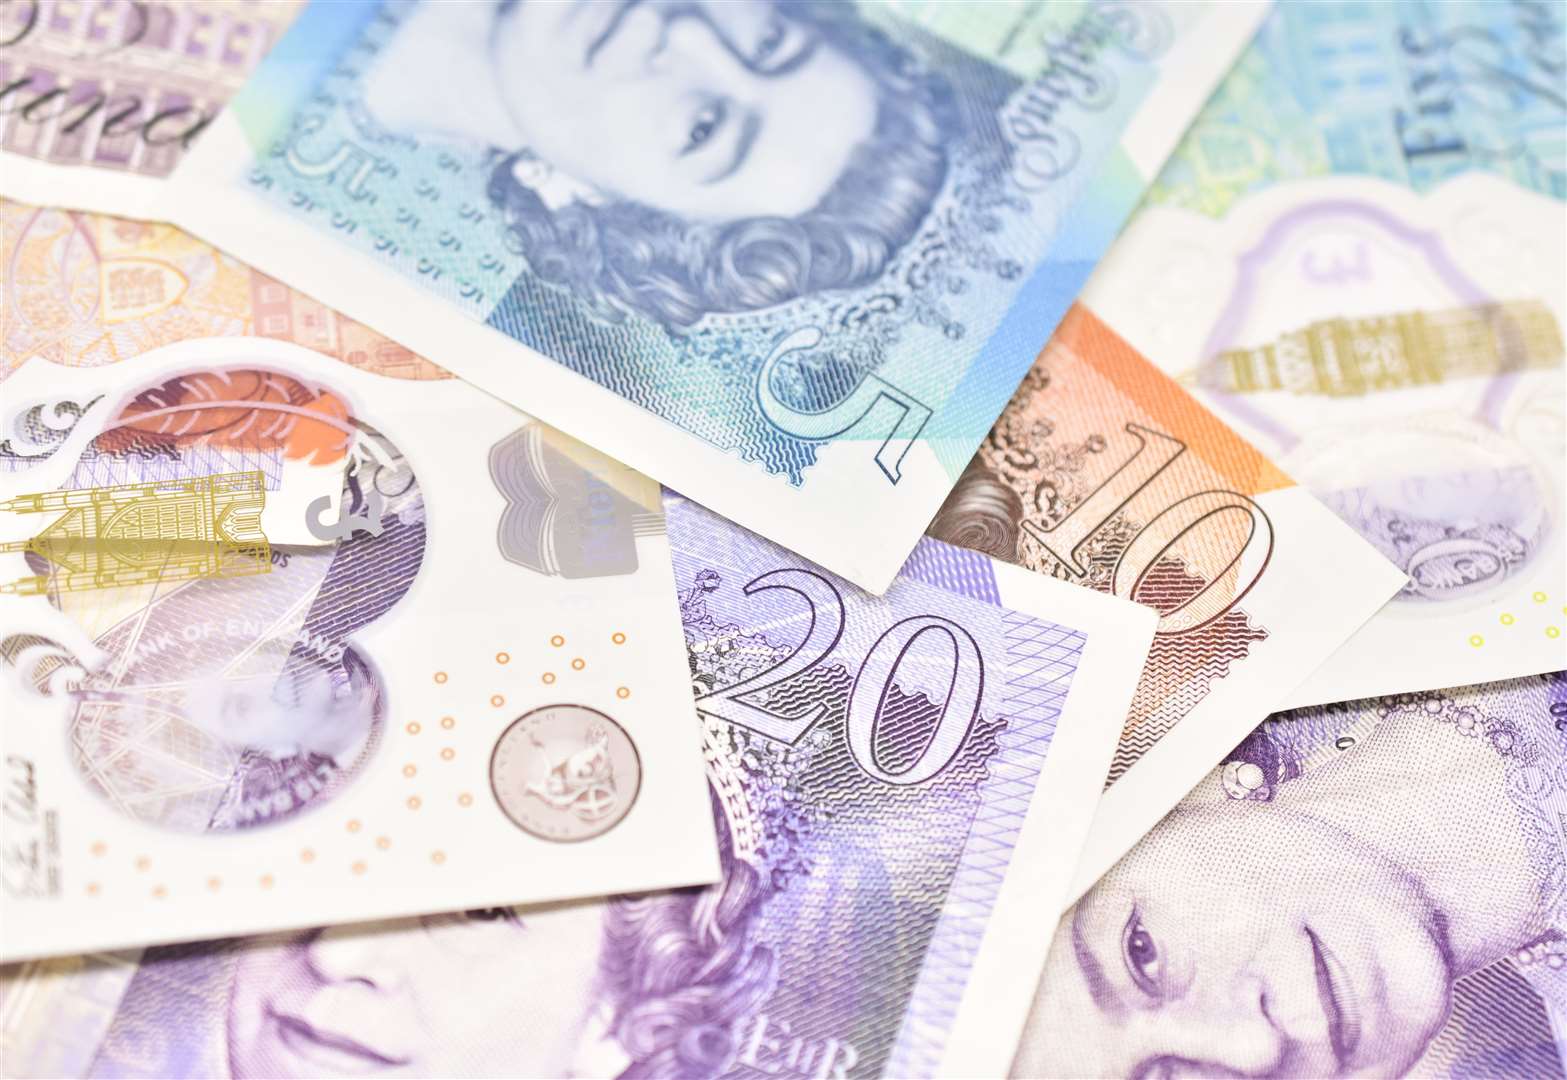 More than £2m of cash has been recovered between April 2018 and March 2019